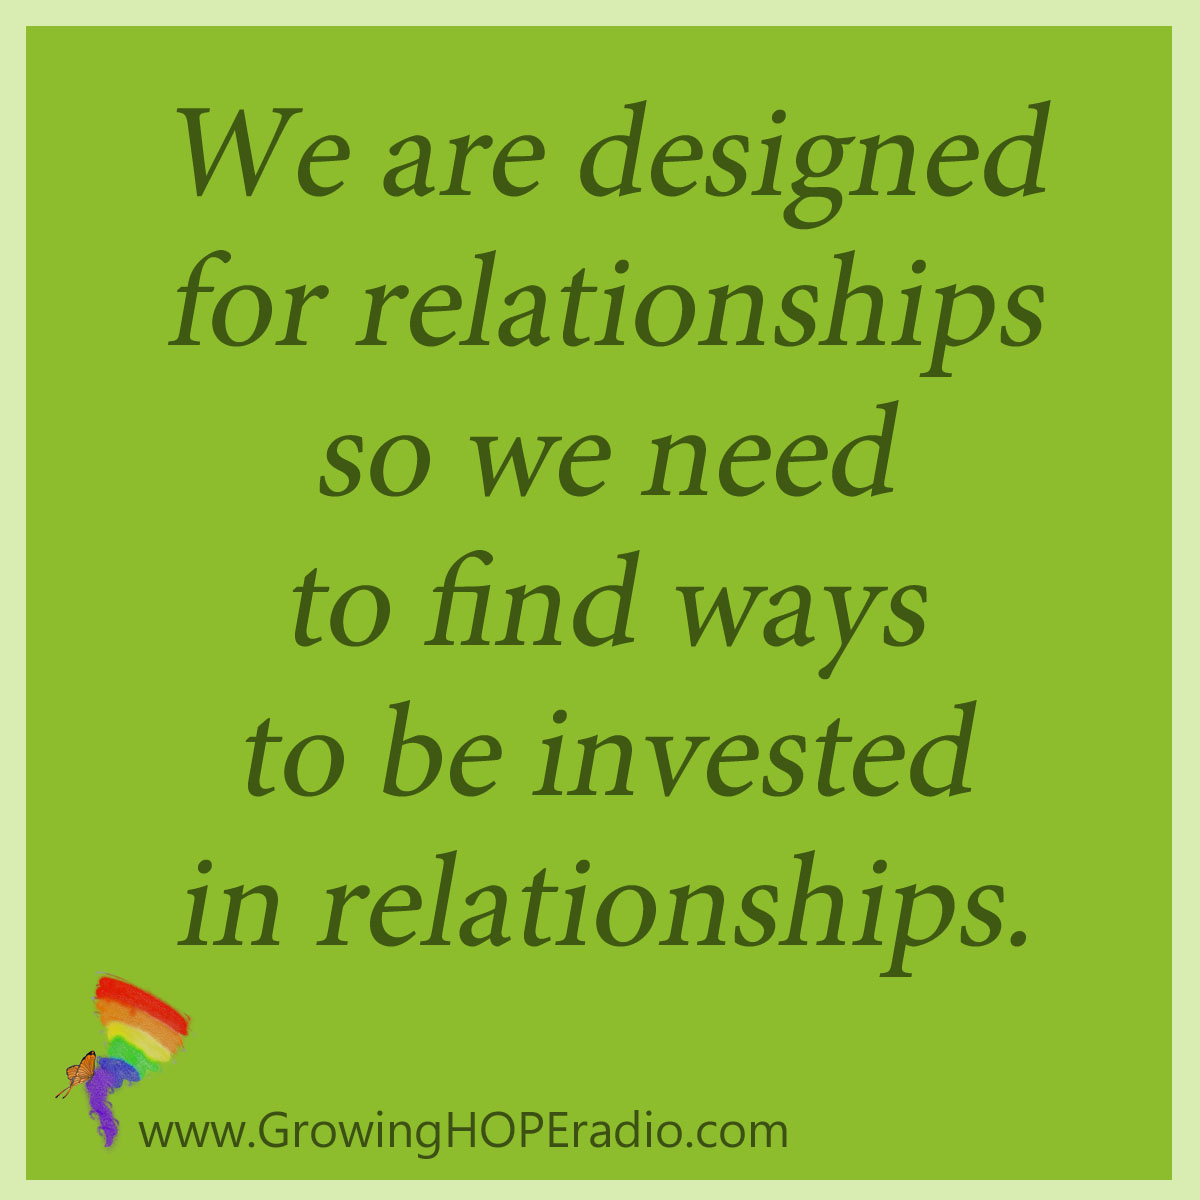 Growing HOPE Daily - quote - designed for relationships